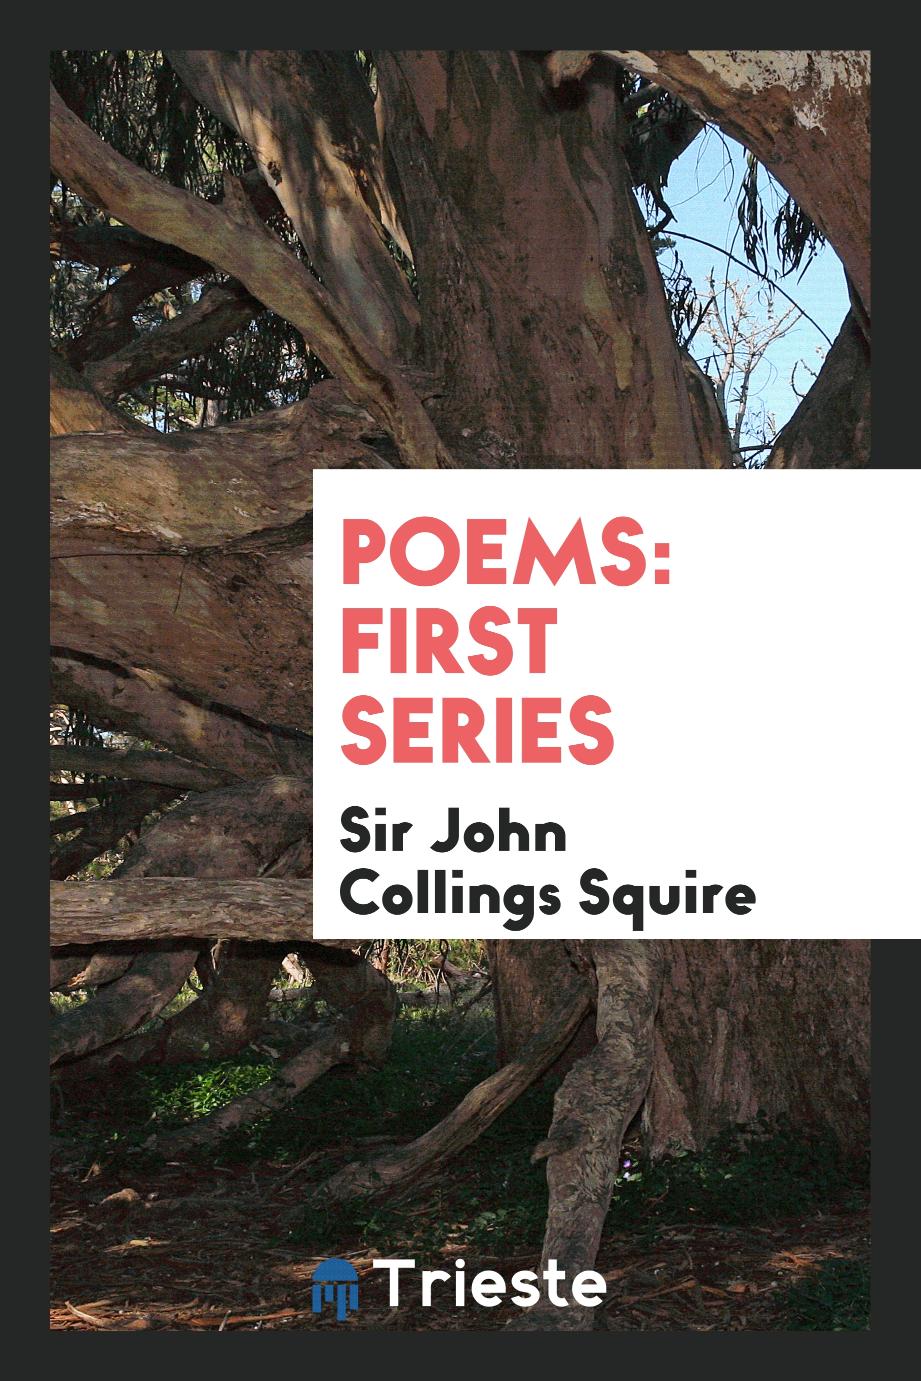 Poems: first series